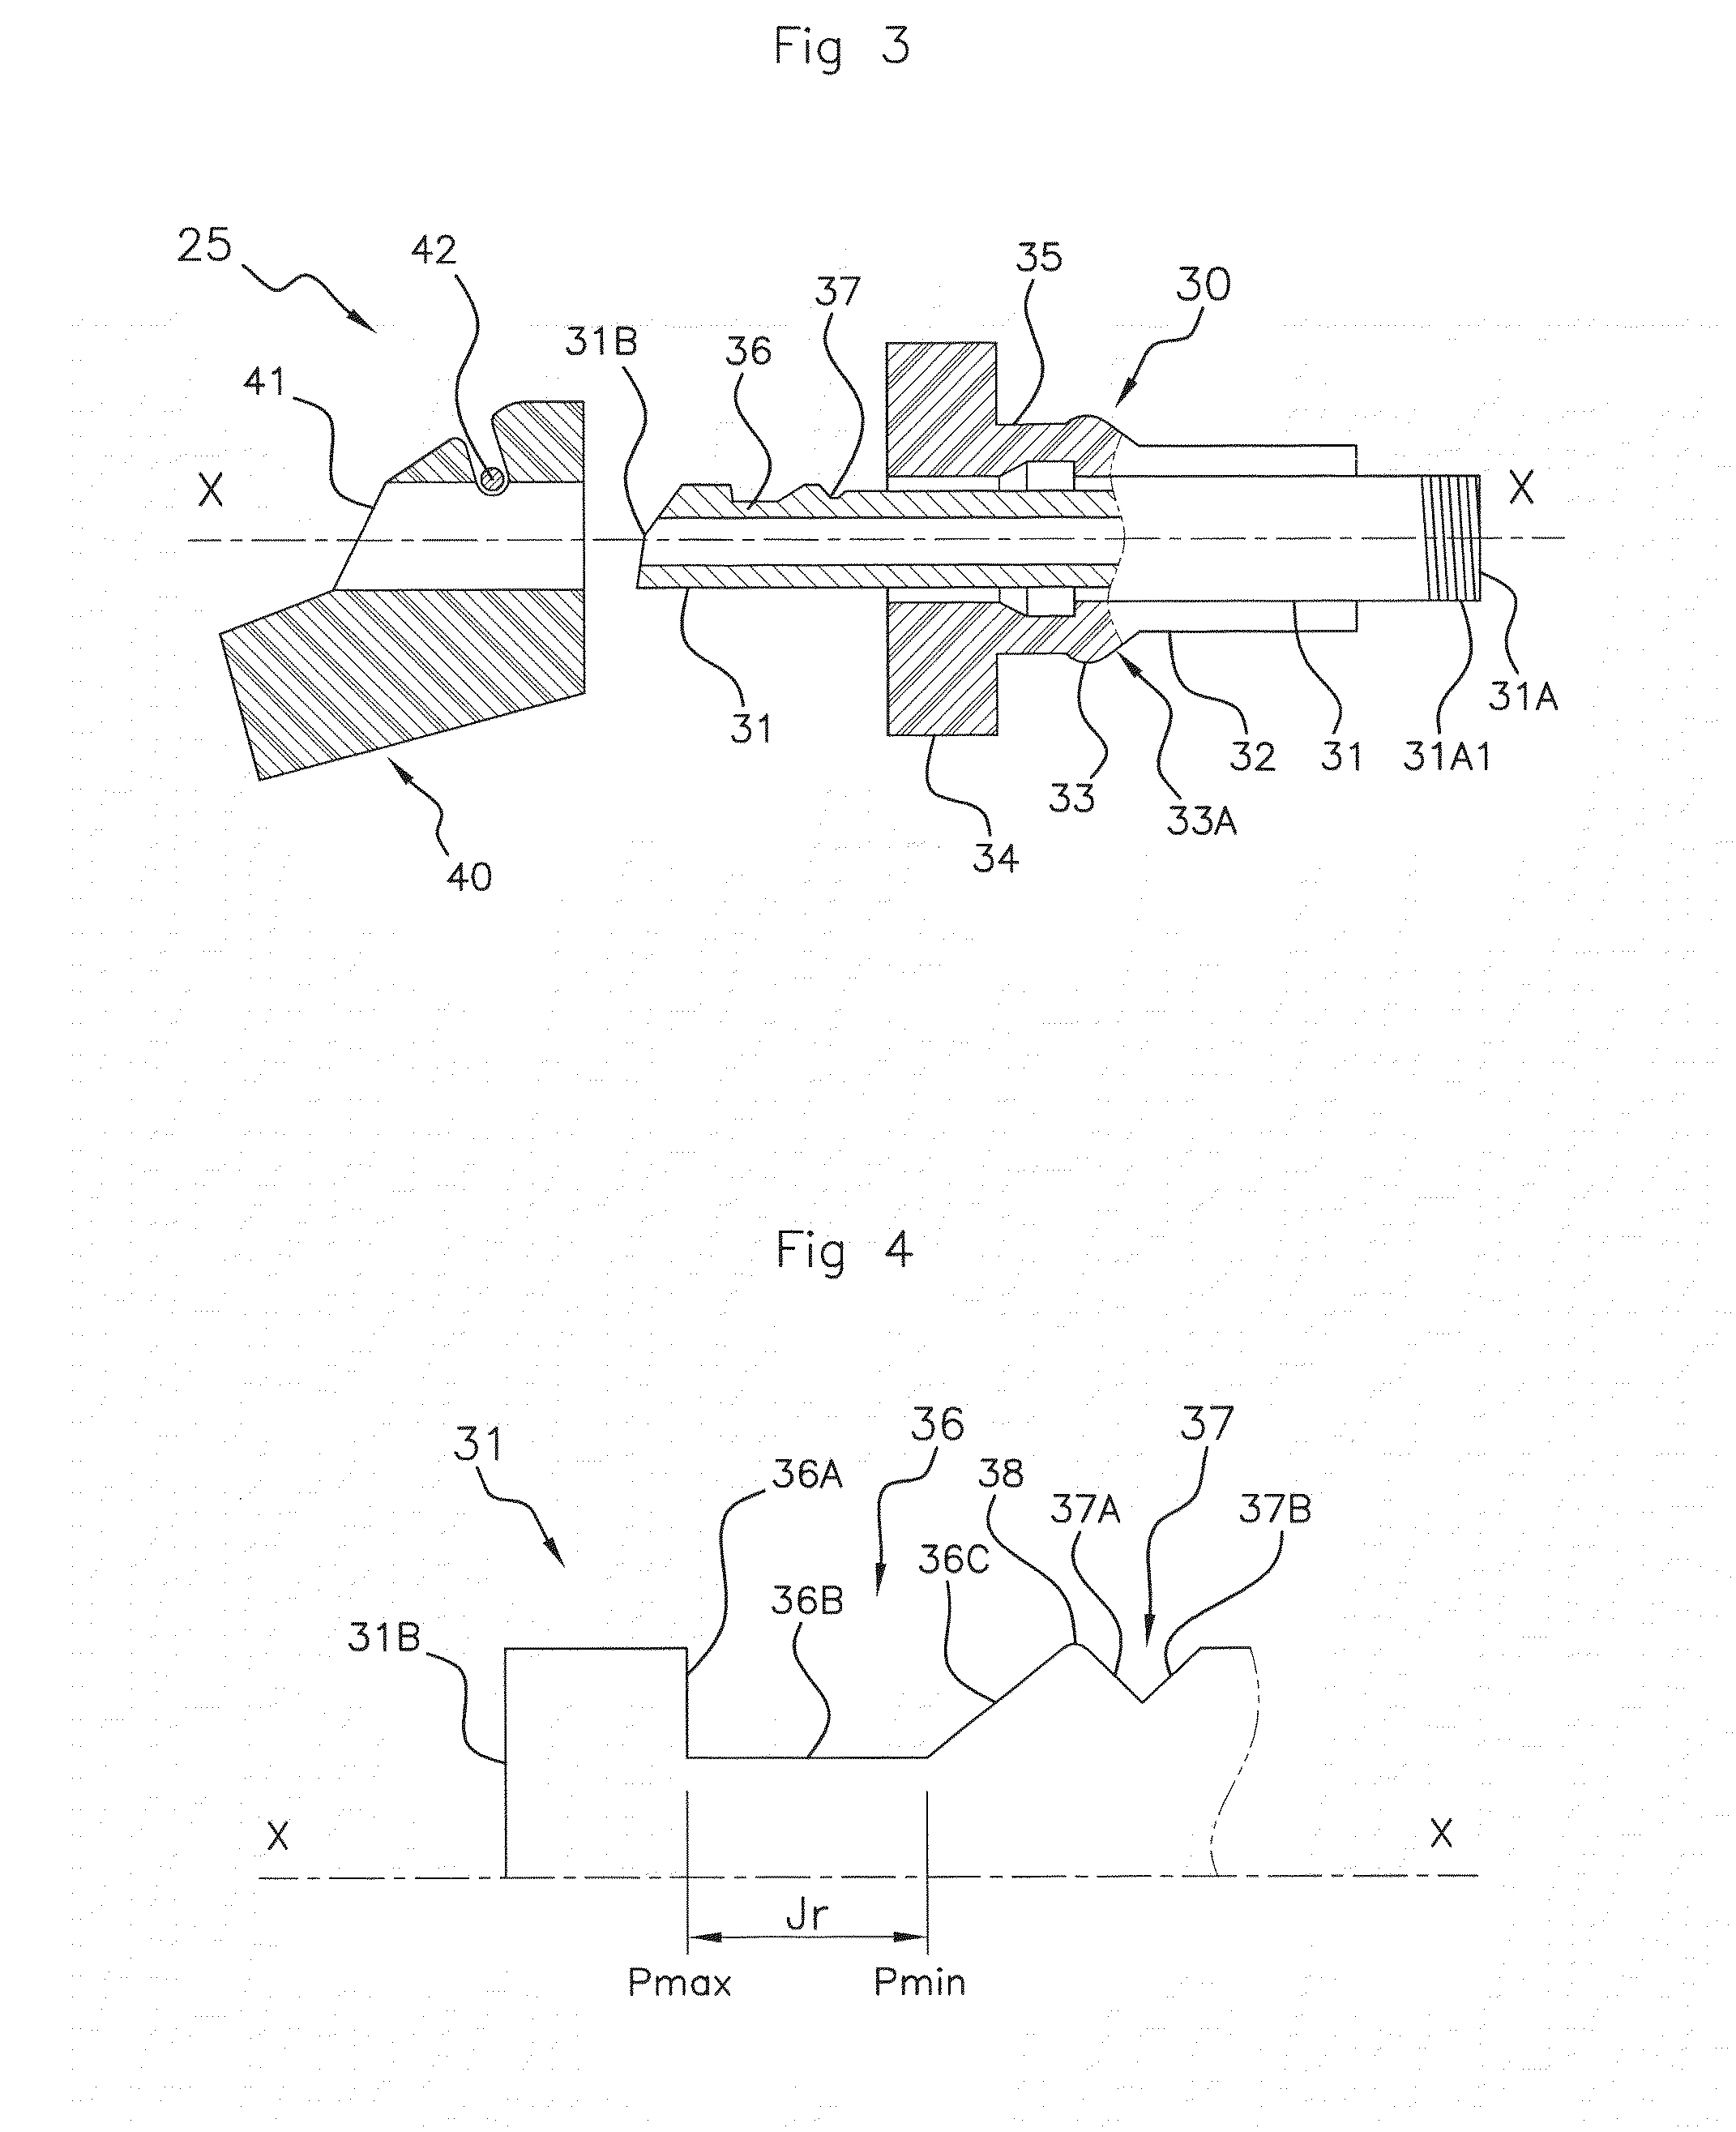 Measurement module and assembly method for such a module on a wheel rim